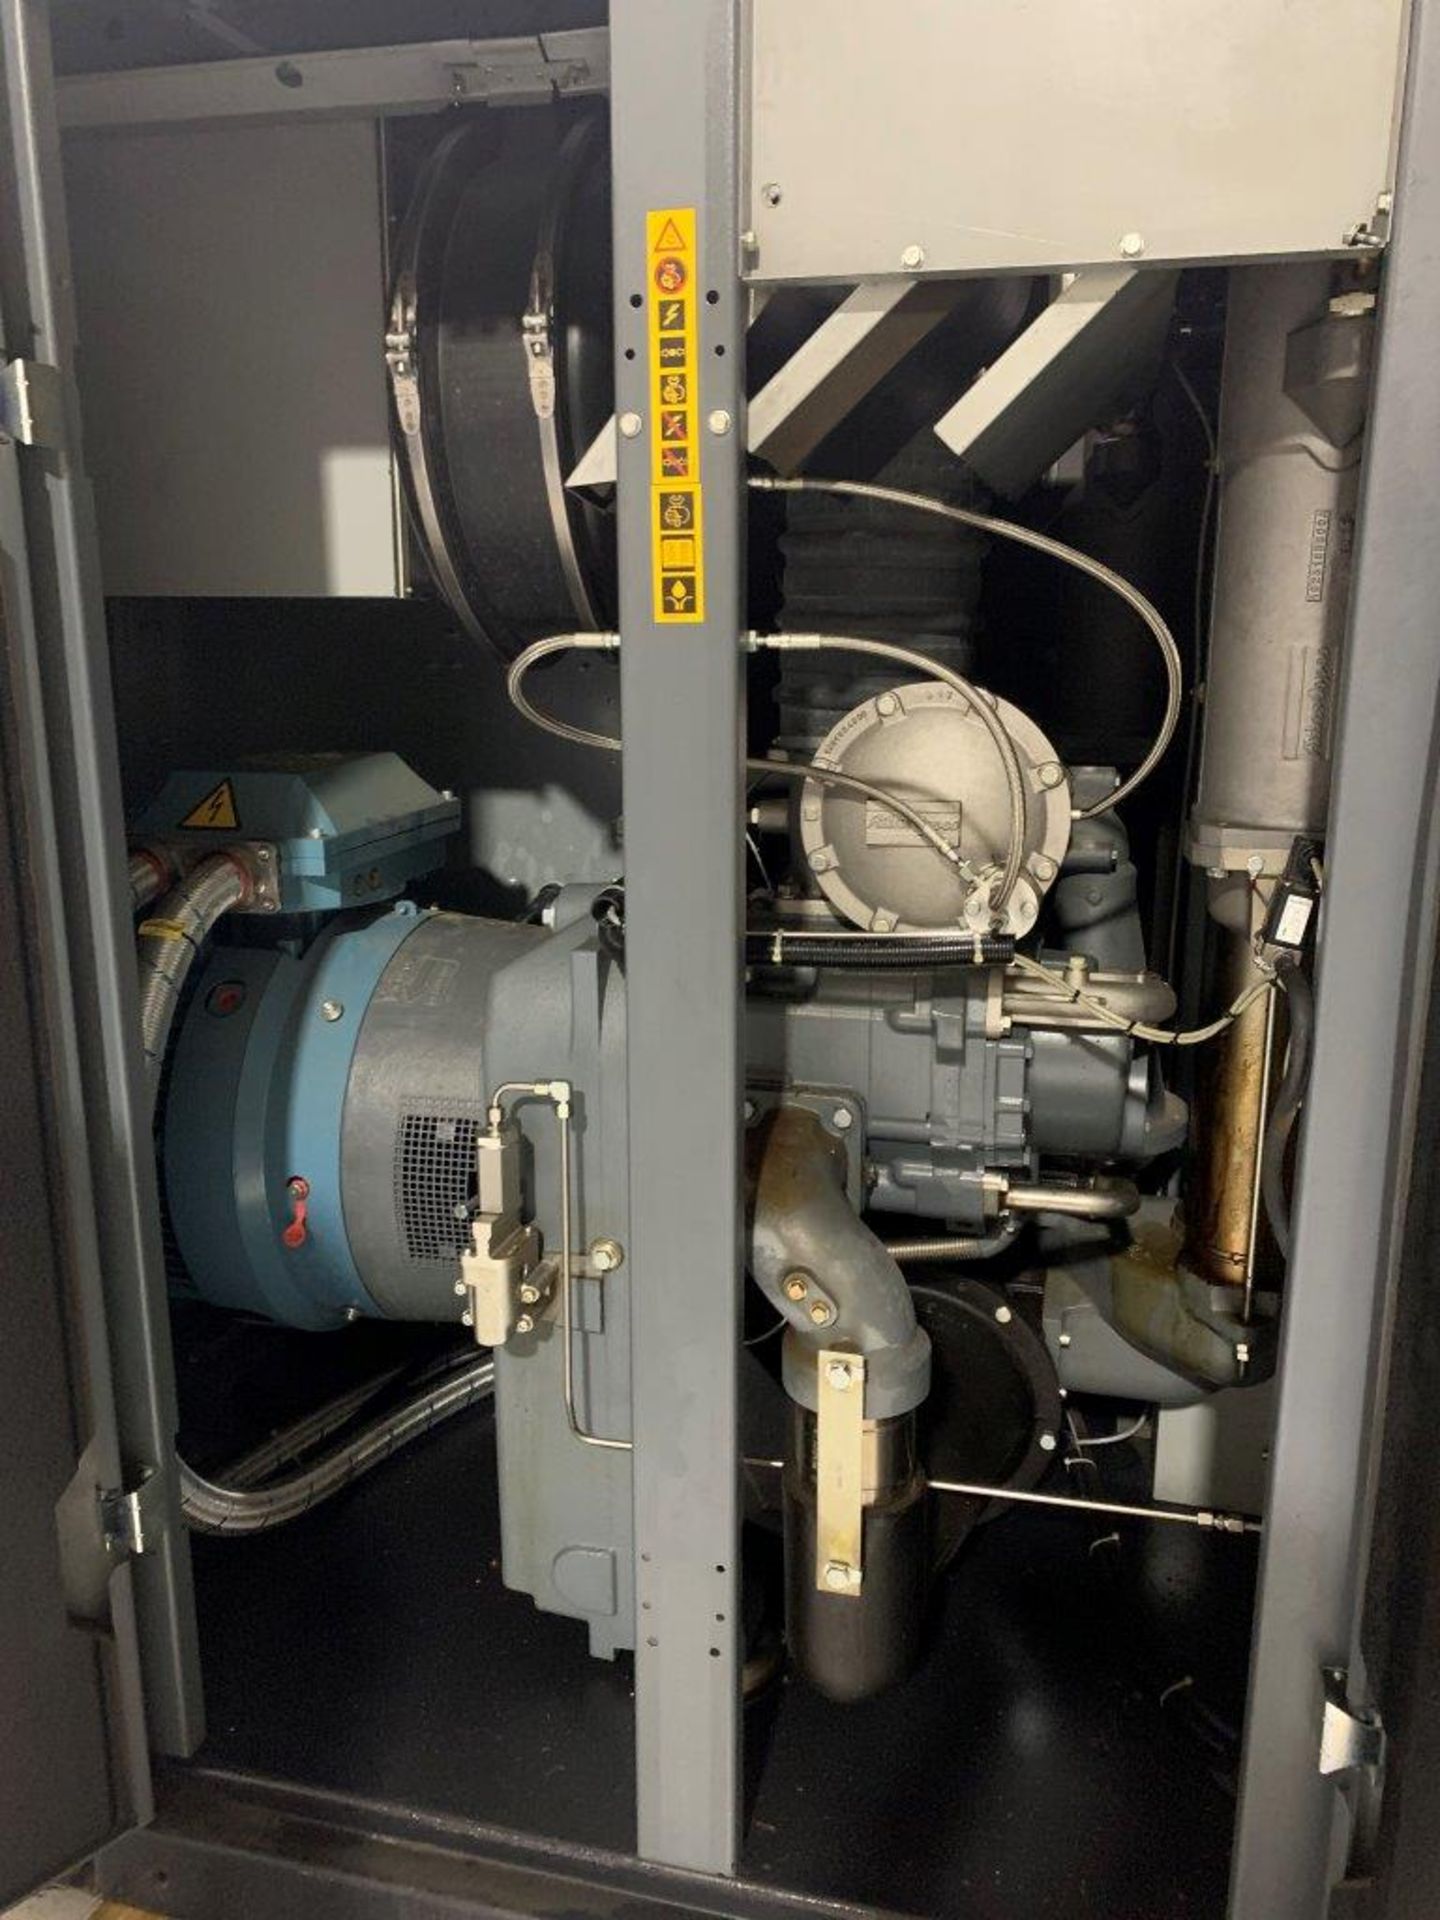 Atlas Copco Used ZT132 Screw Type Air Compressor. 182 HP, 125 Max PSI, Air-Cooled, 460V, Yr. 2017 - Image 6 of 14